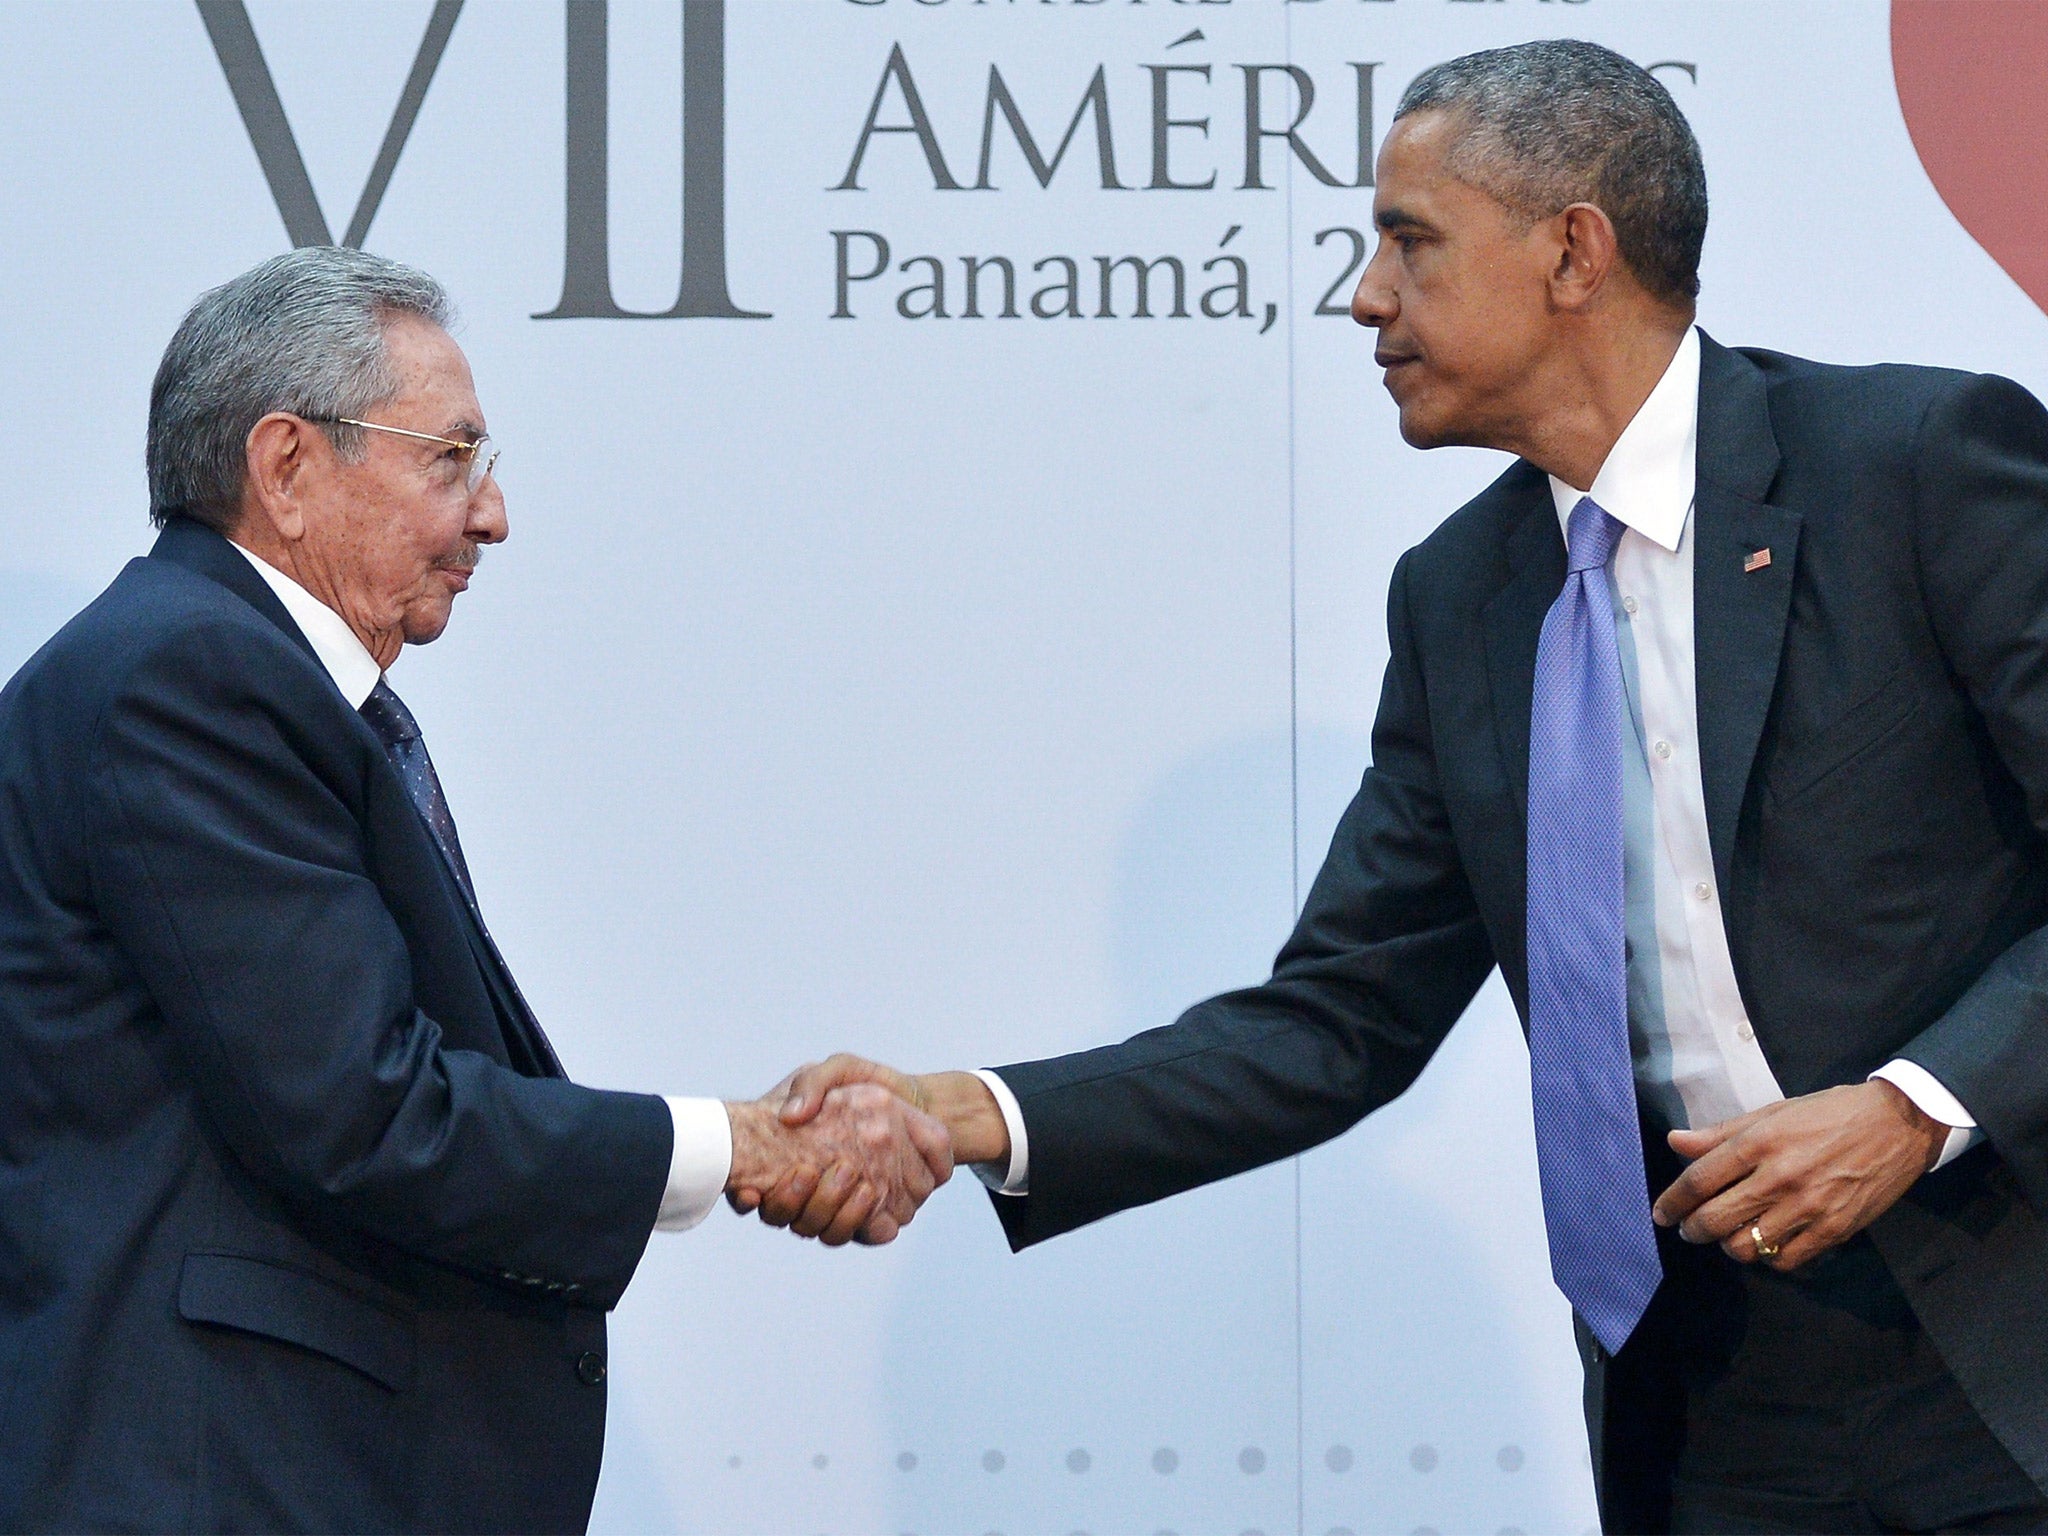 Mr Obama and Mr Castro have worked to change the dynamic of their countries' relationship